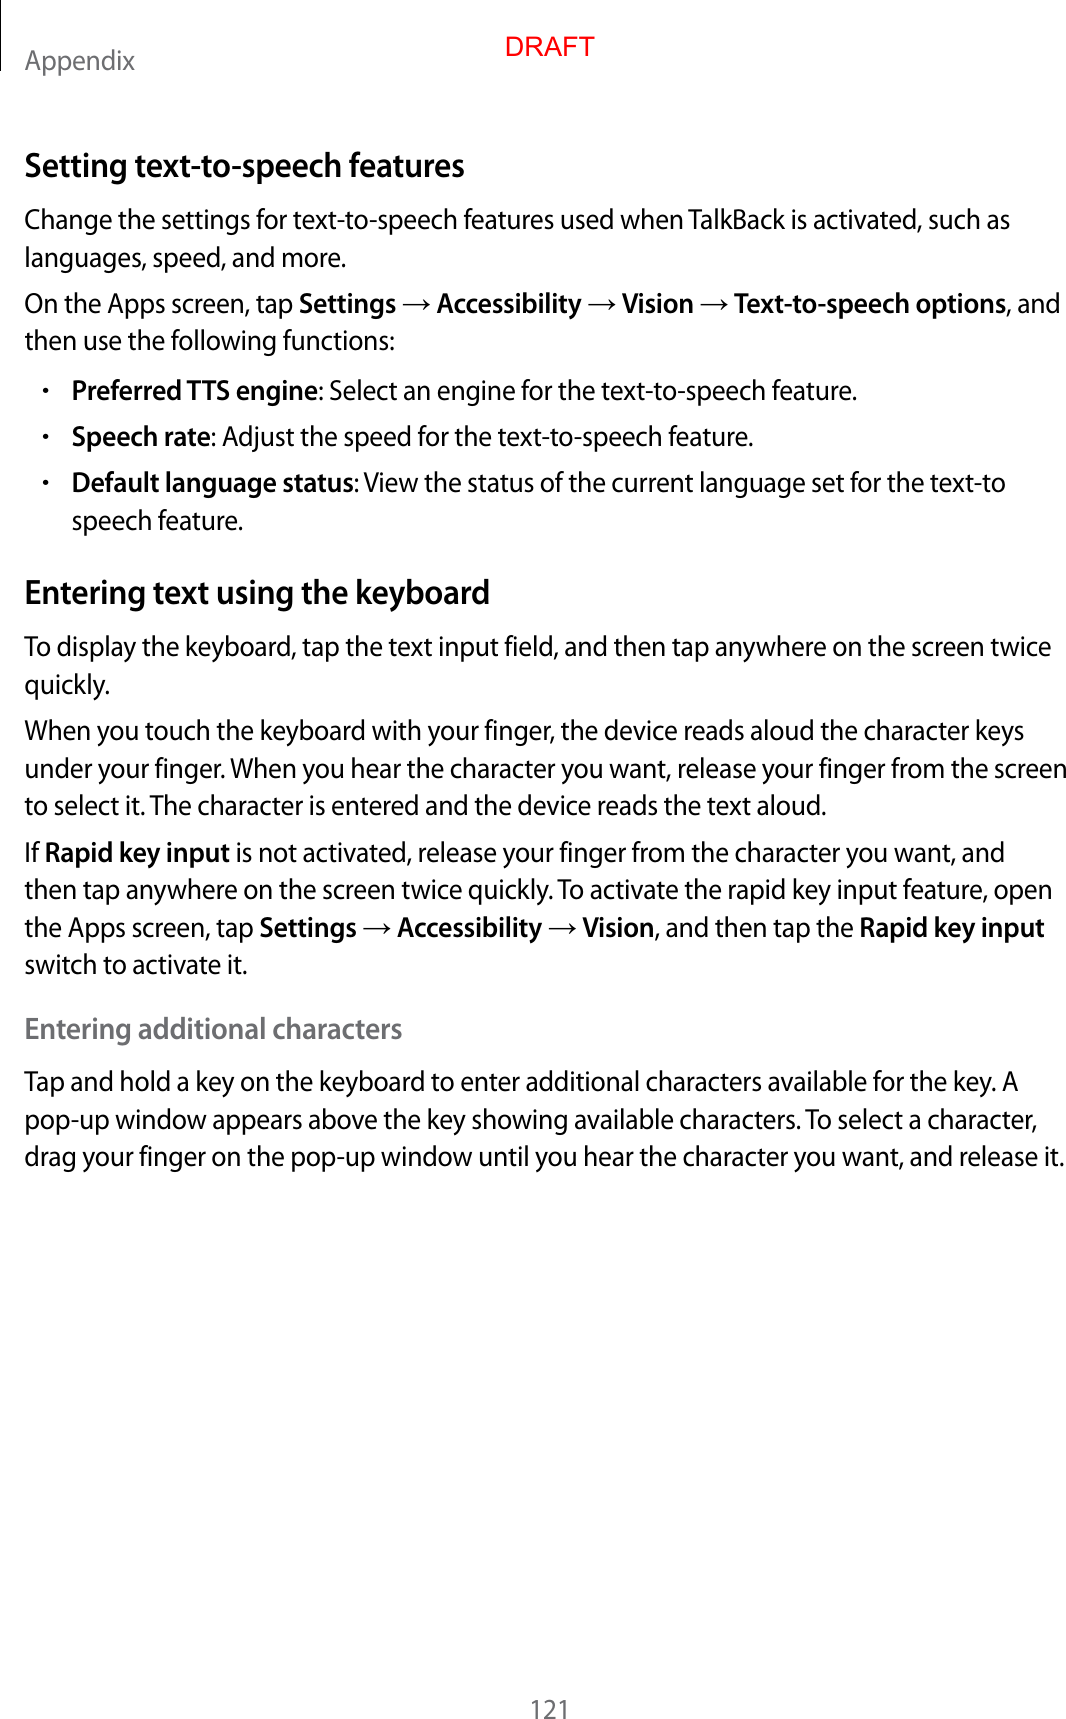 Appendix121Setting text-to-speech featur esChange the settings for t ext-to-speech featur es used when TalkBack is activated , such as languages, speed , and mor e .On the Apps screen, tap Settings  Accessibility  Vision  Text-to-speech options, and then use the follo wing functions:•Preferred TTS engine: Select an engine f or the t ext-to-speech featur e .•Speech rat e: Adjust the speed f or the t ext-to-speech featur e .•Default language status: View the status of the curr ent language set for the text-to speech featur e.Entering t e xt using the keyboardTo display the keyboar d , tap the text input field, and then tap an ywhere on the scr een twice quickly.When you t ouch the keyboar d with y our finger, the device reads aloud the character keys under your finger. When you hear the character you wan t, r elease y our finger fr om the scr een to select it. The character is enter ed and the devic e r eads the te xt aloud.If Rapid key input is not activated, r elease y our finger fr om the character y ou want , and then tap anywhere on the scr een twice quickly. To activat e the rapid key input f ea tur e , open the Apps screen, tap Settings  Accessibility  Vision, and then tap the Rapid key input switch to activate it.Entering additional char actersTap and hold a key on the keyboard to ent er additional characters av ailable f or the key. A pop-up window appears above the key showing a v ailable characters. To select a character, drag your finger on the pop-up window until y ou hear the character y ou want , and r elease it.DRAFT